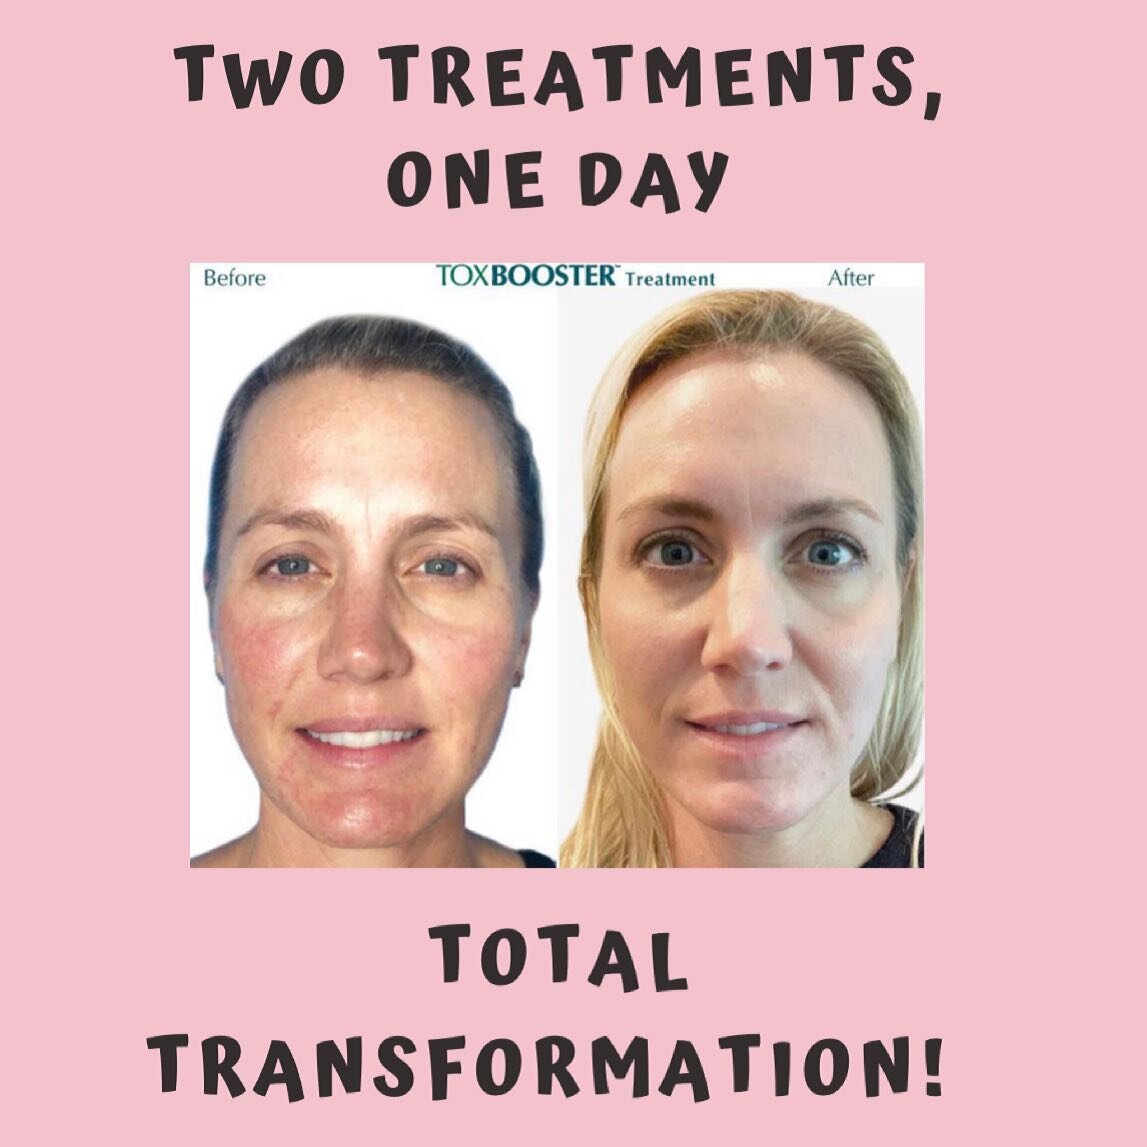 Two Treatments, One Appointment, Long Lasting Results! 

Come On In for a VI Peel and TOX Booster Injection Treatment! 

 VI Peels treat acne, melasma, aging, hyperpigmentation and scarring, while increasing cell turnover and stimulating collagen pro